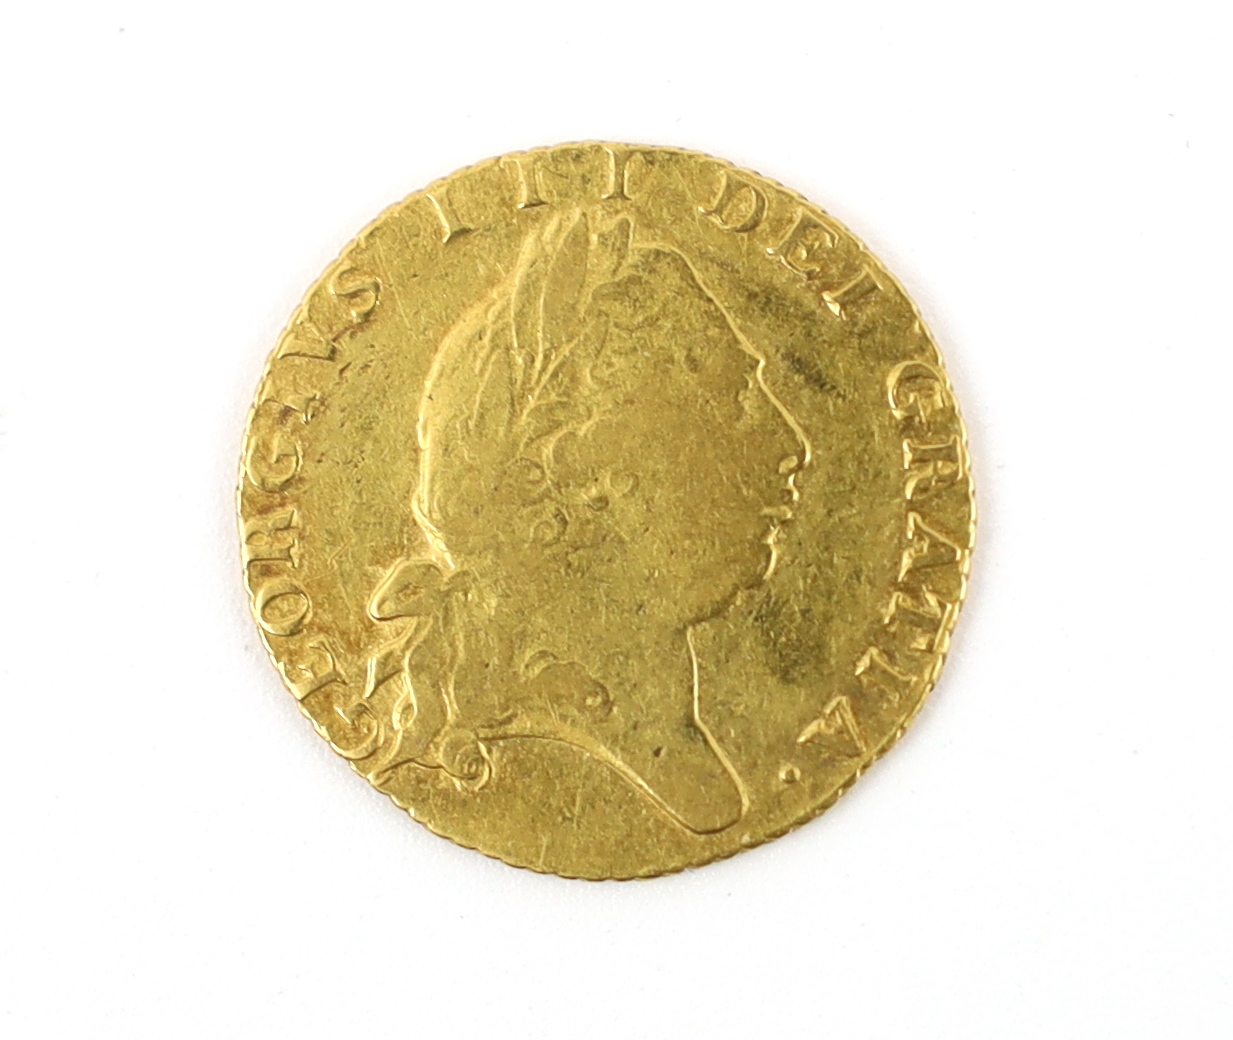 British Gold Coins, George III half guinea, 1798/7, fine or better (S3735)